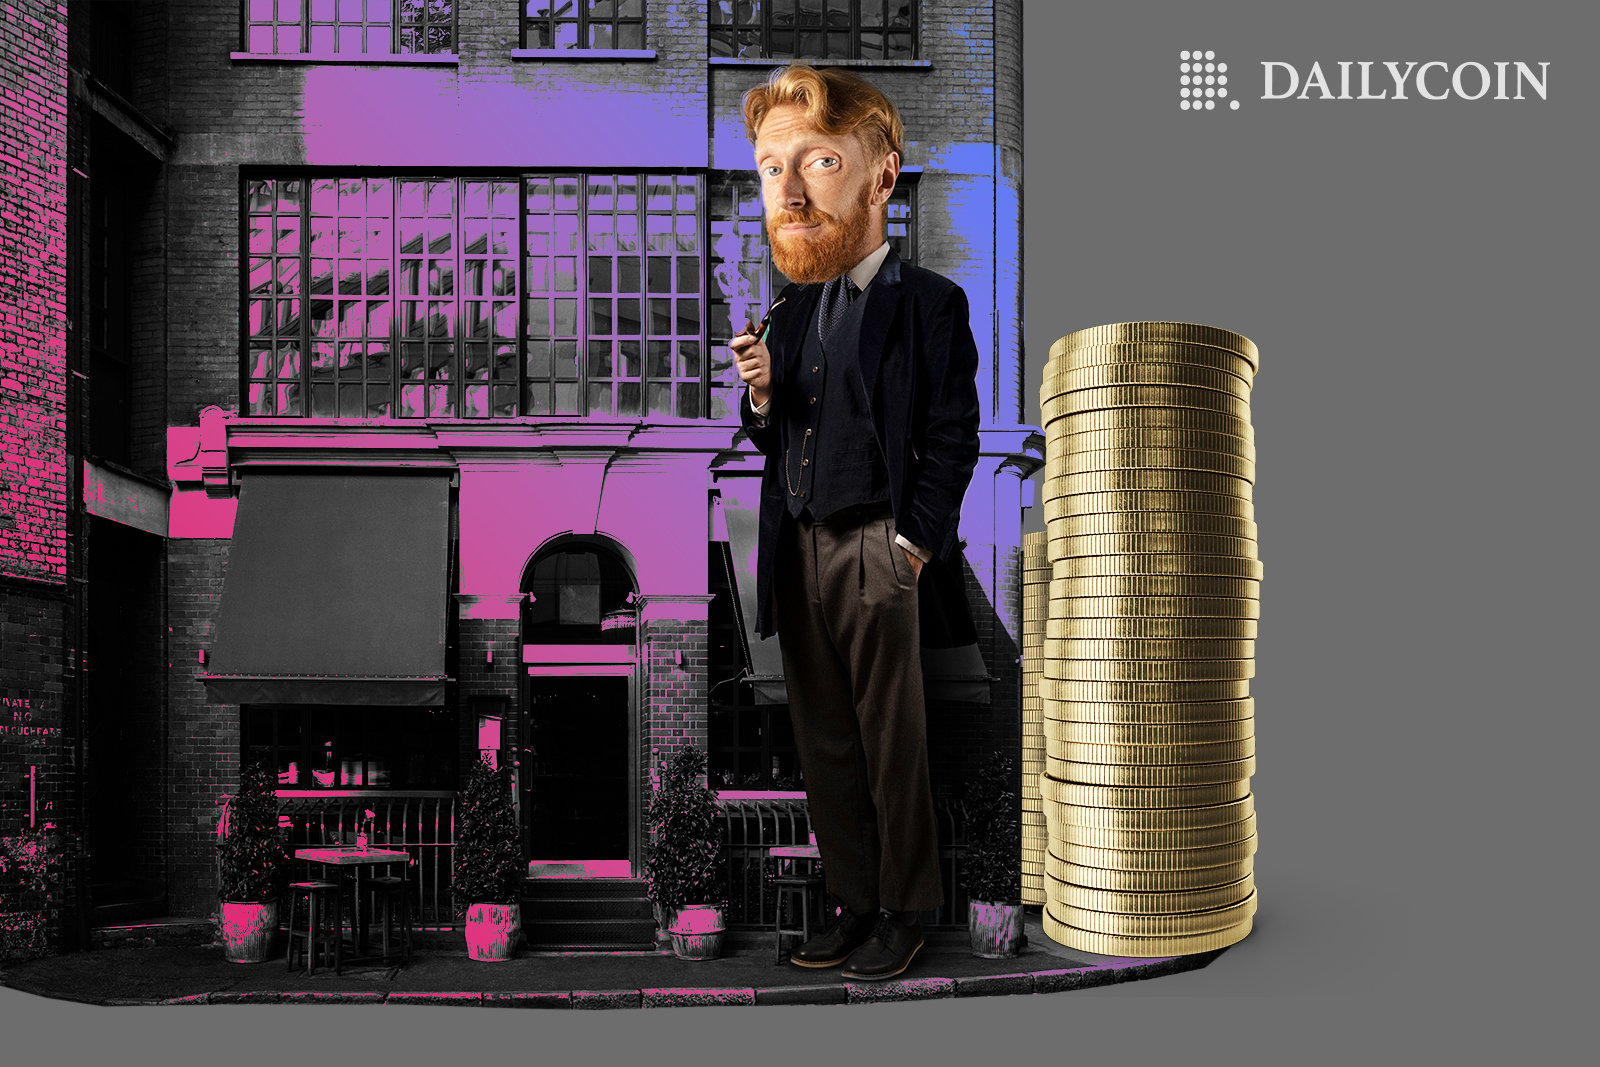 Man standing next to a computer and a stack of altcoins.